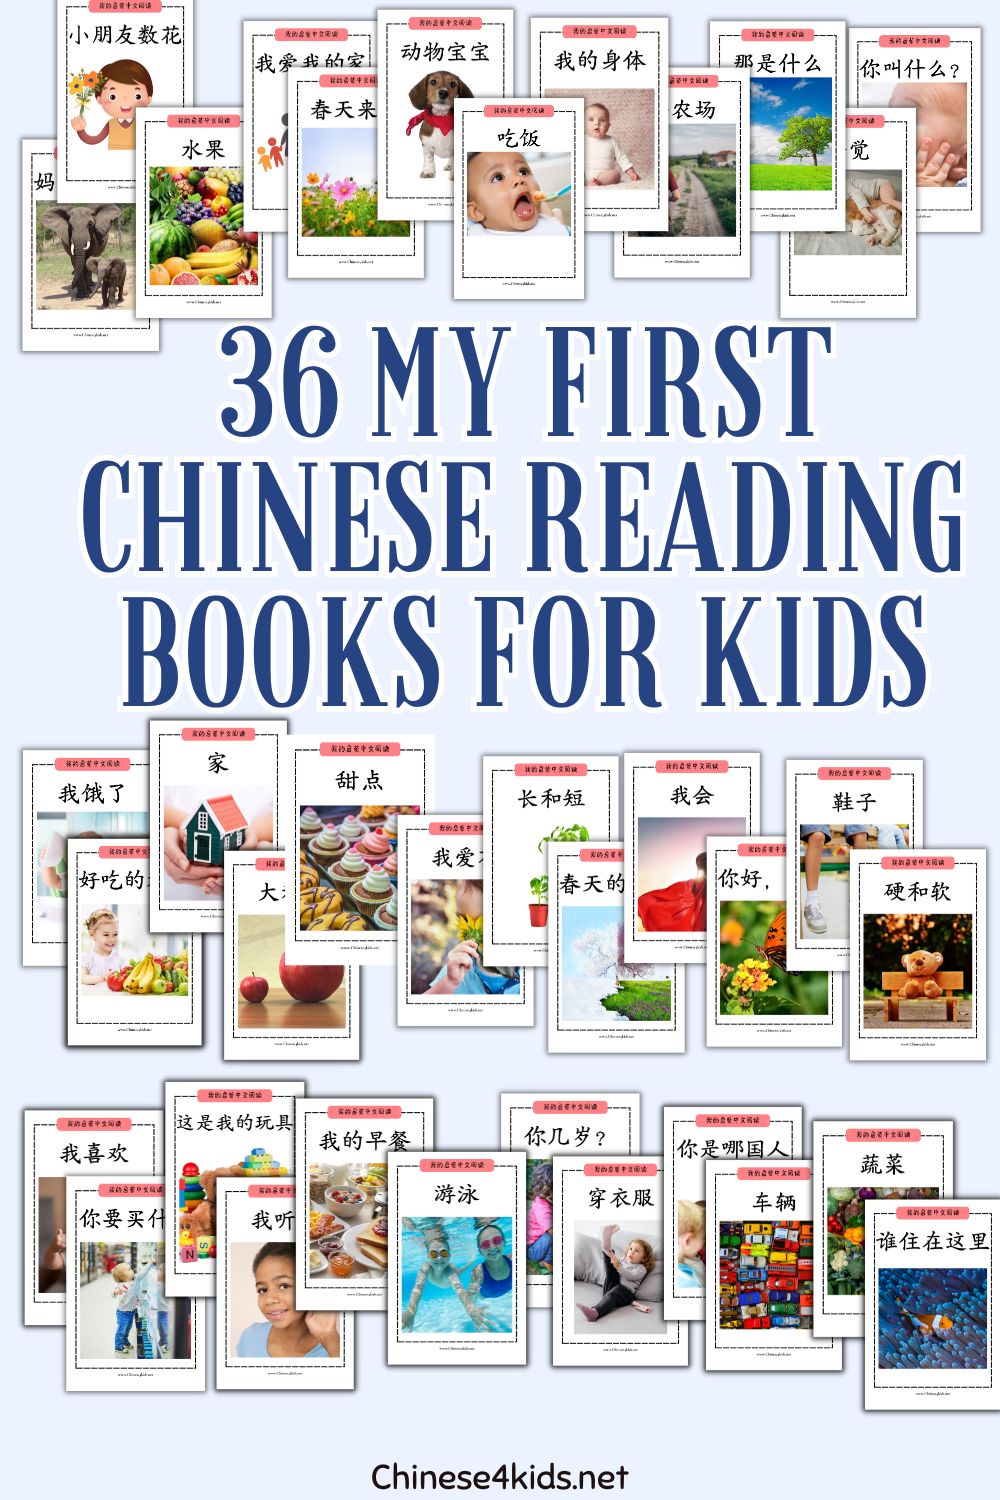 Complete 36 My First Chinese Reading books | Reading books for Chinese students